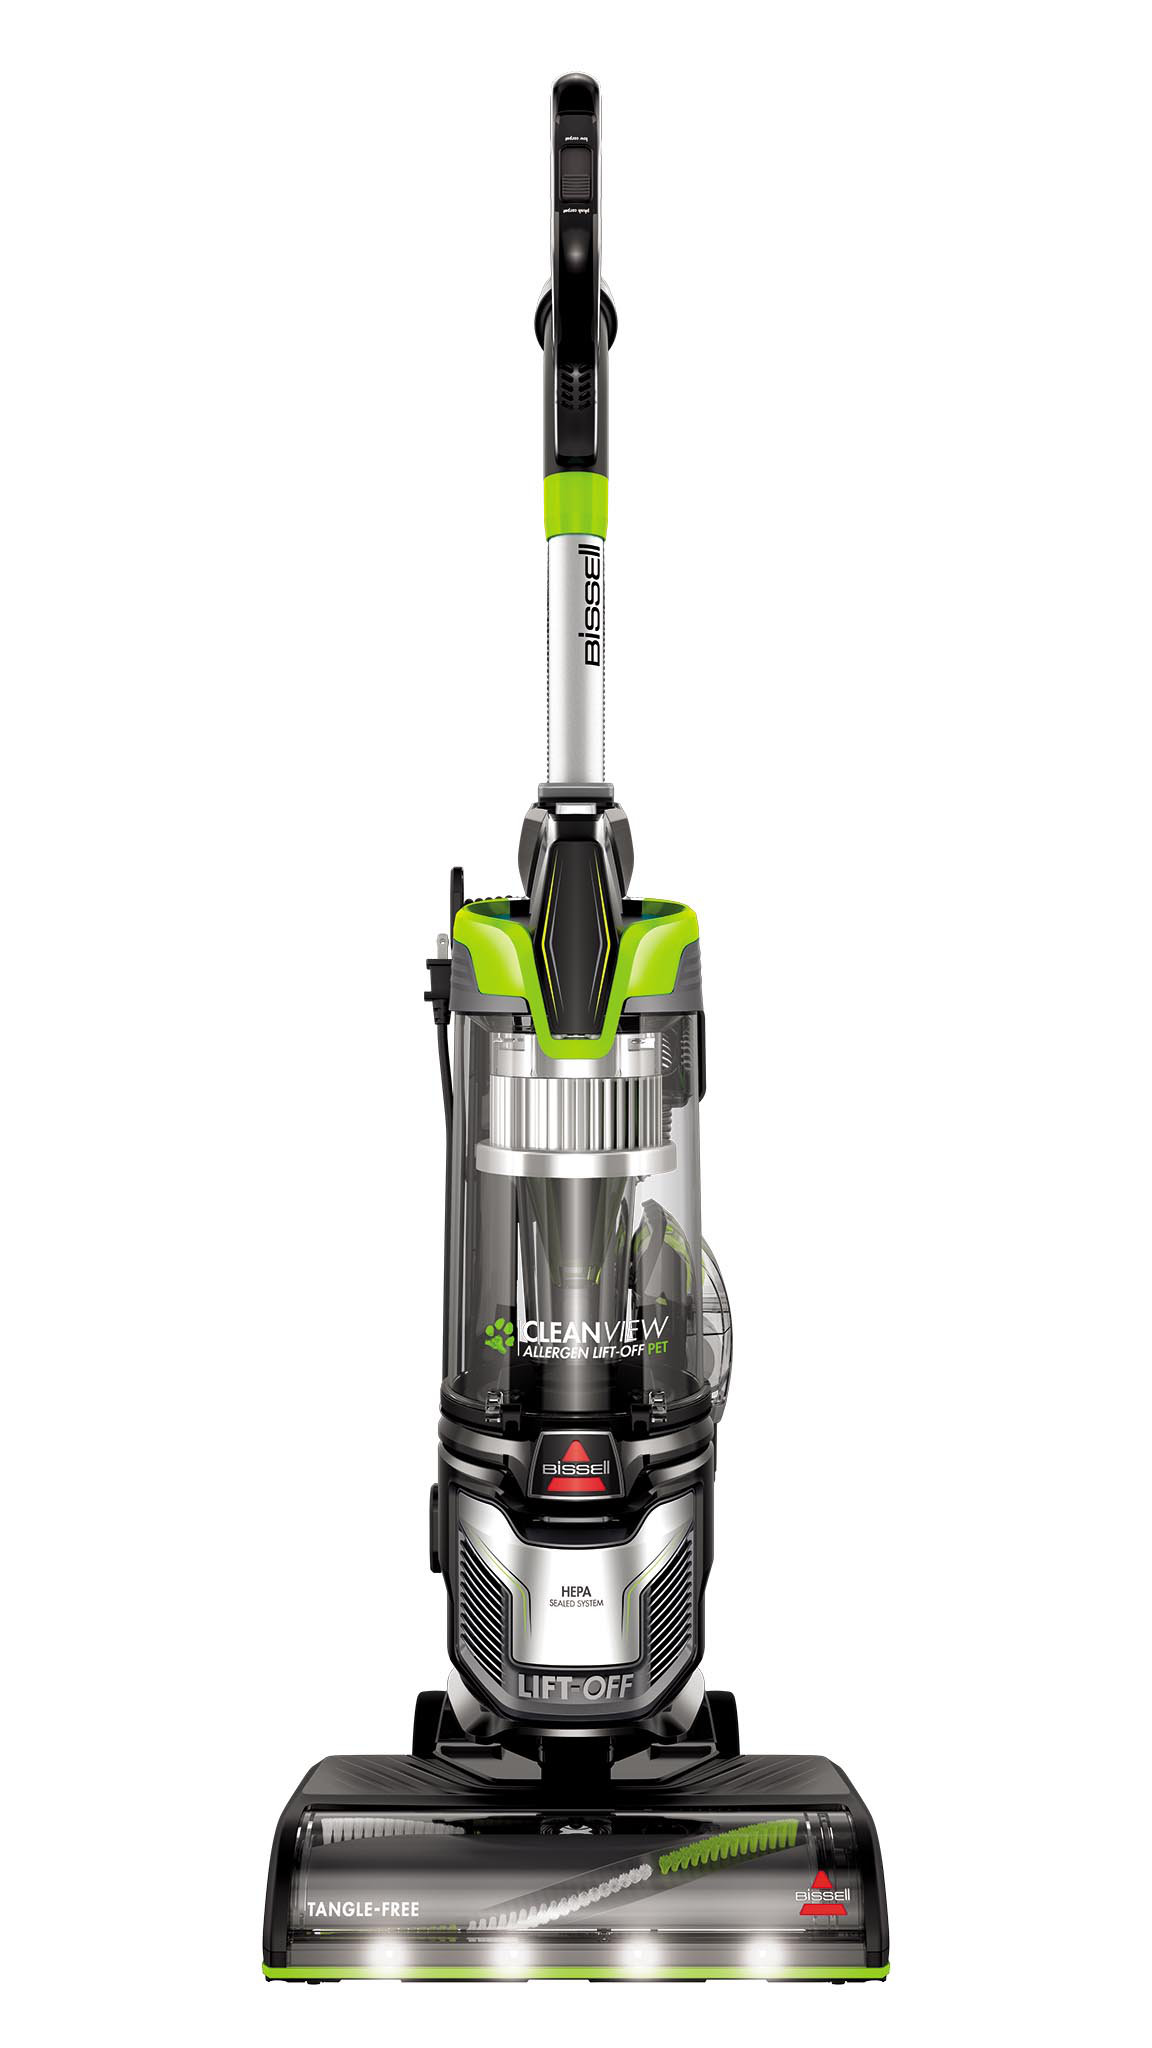 Bissell 2087 Pet Hair Eraser Lift-Off Upright Vacuum Cleaner